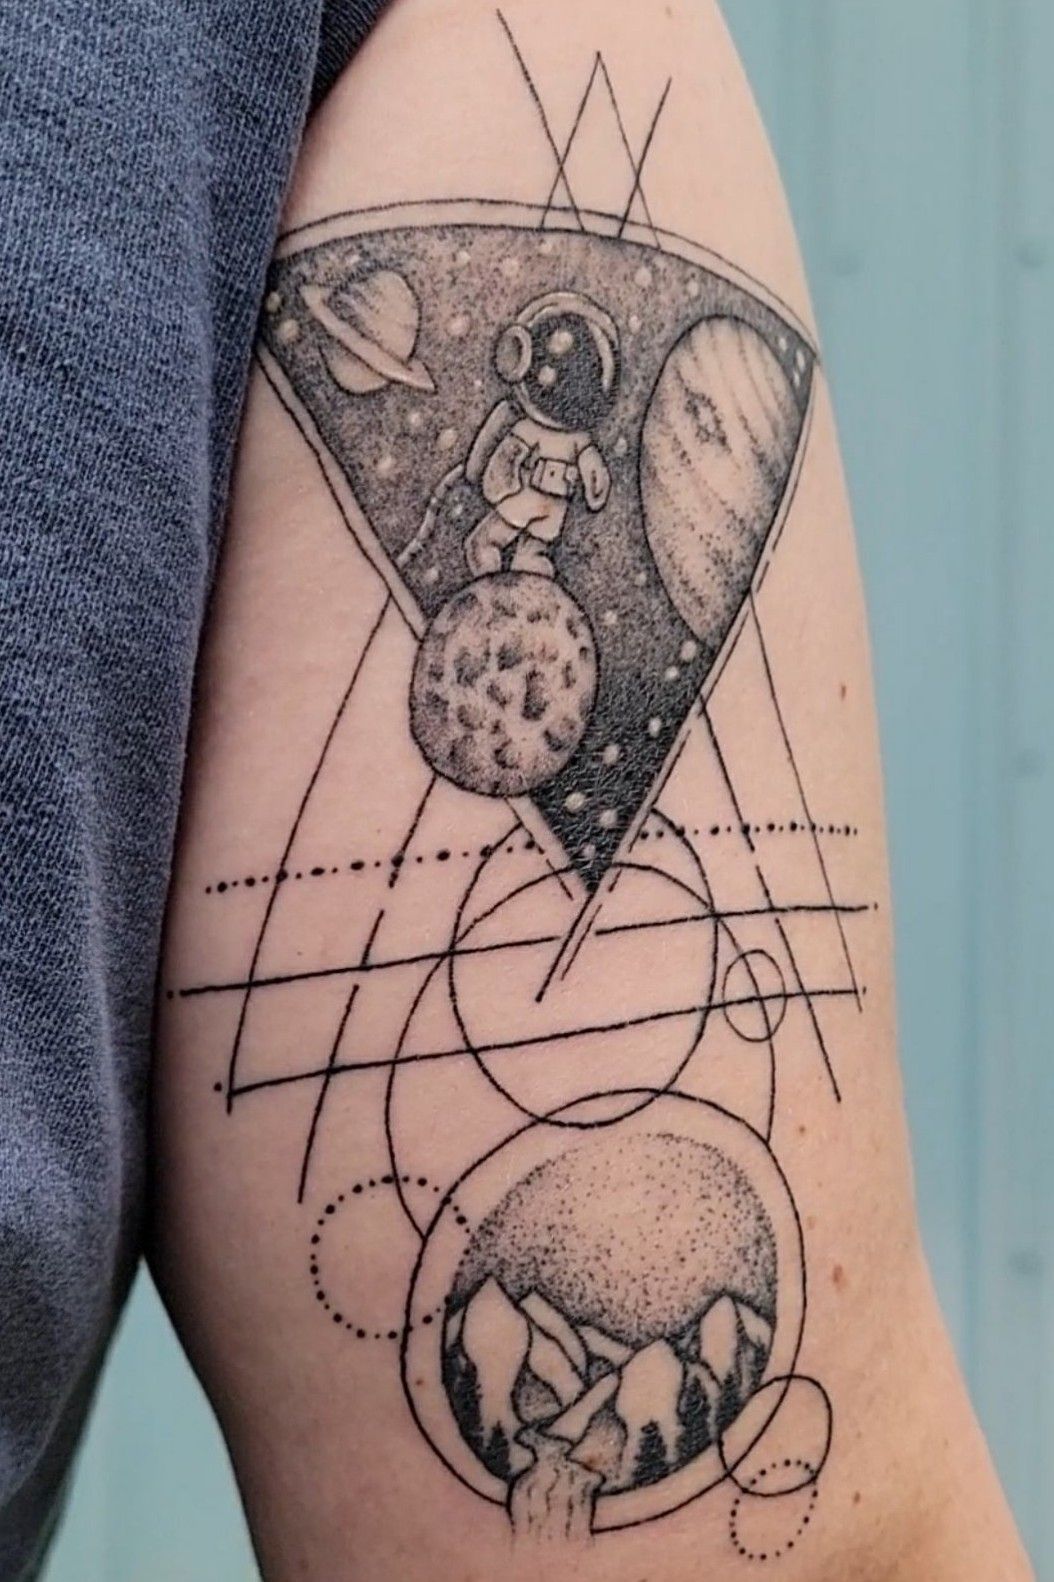 Detailed black and gray astronaut tattoo - Tattoogrid.net